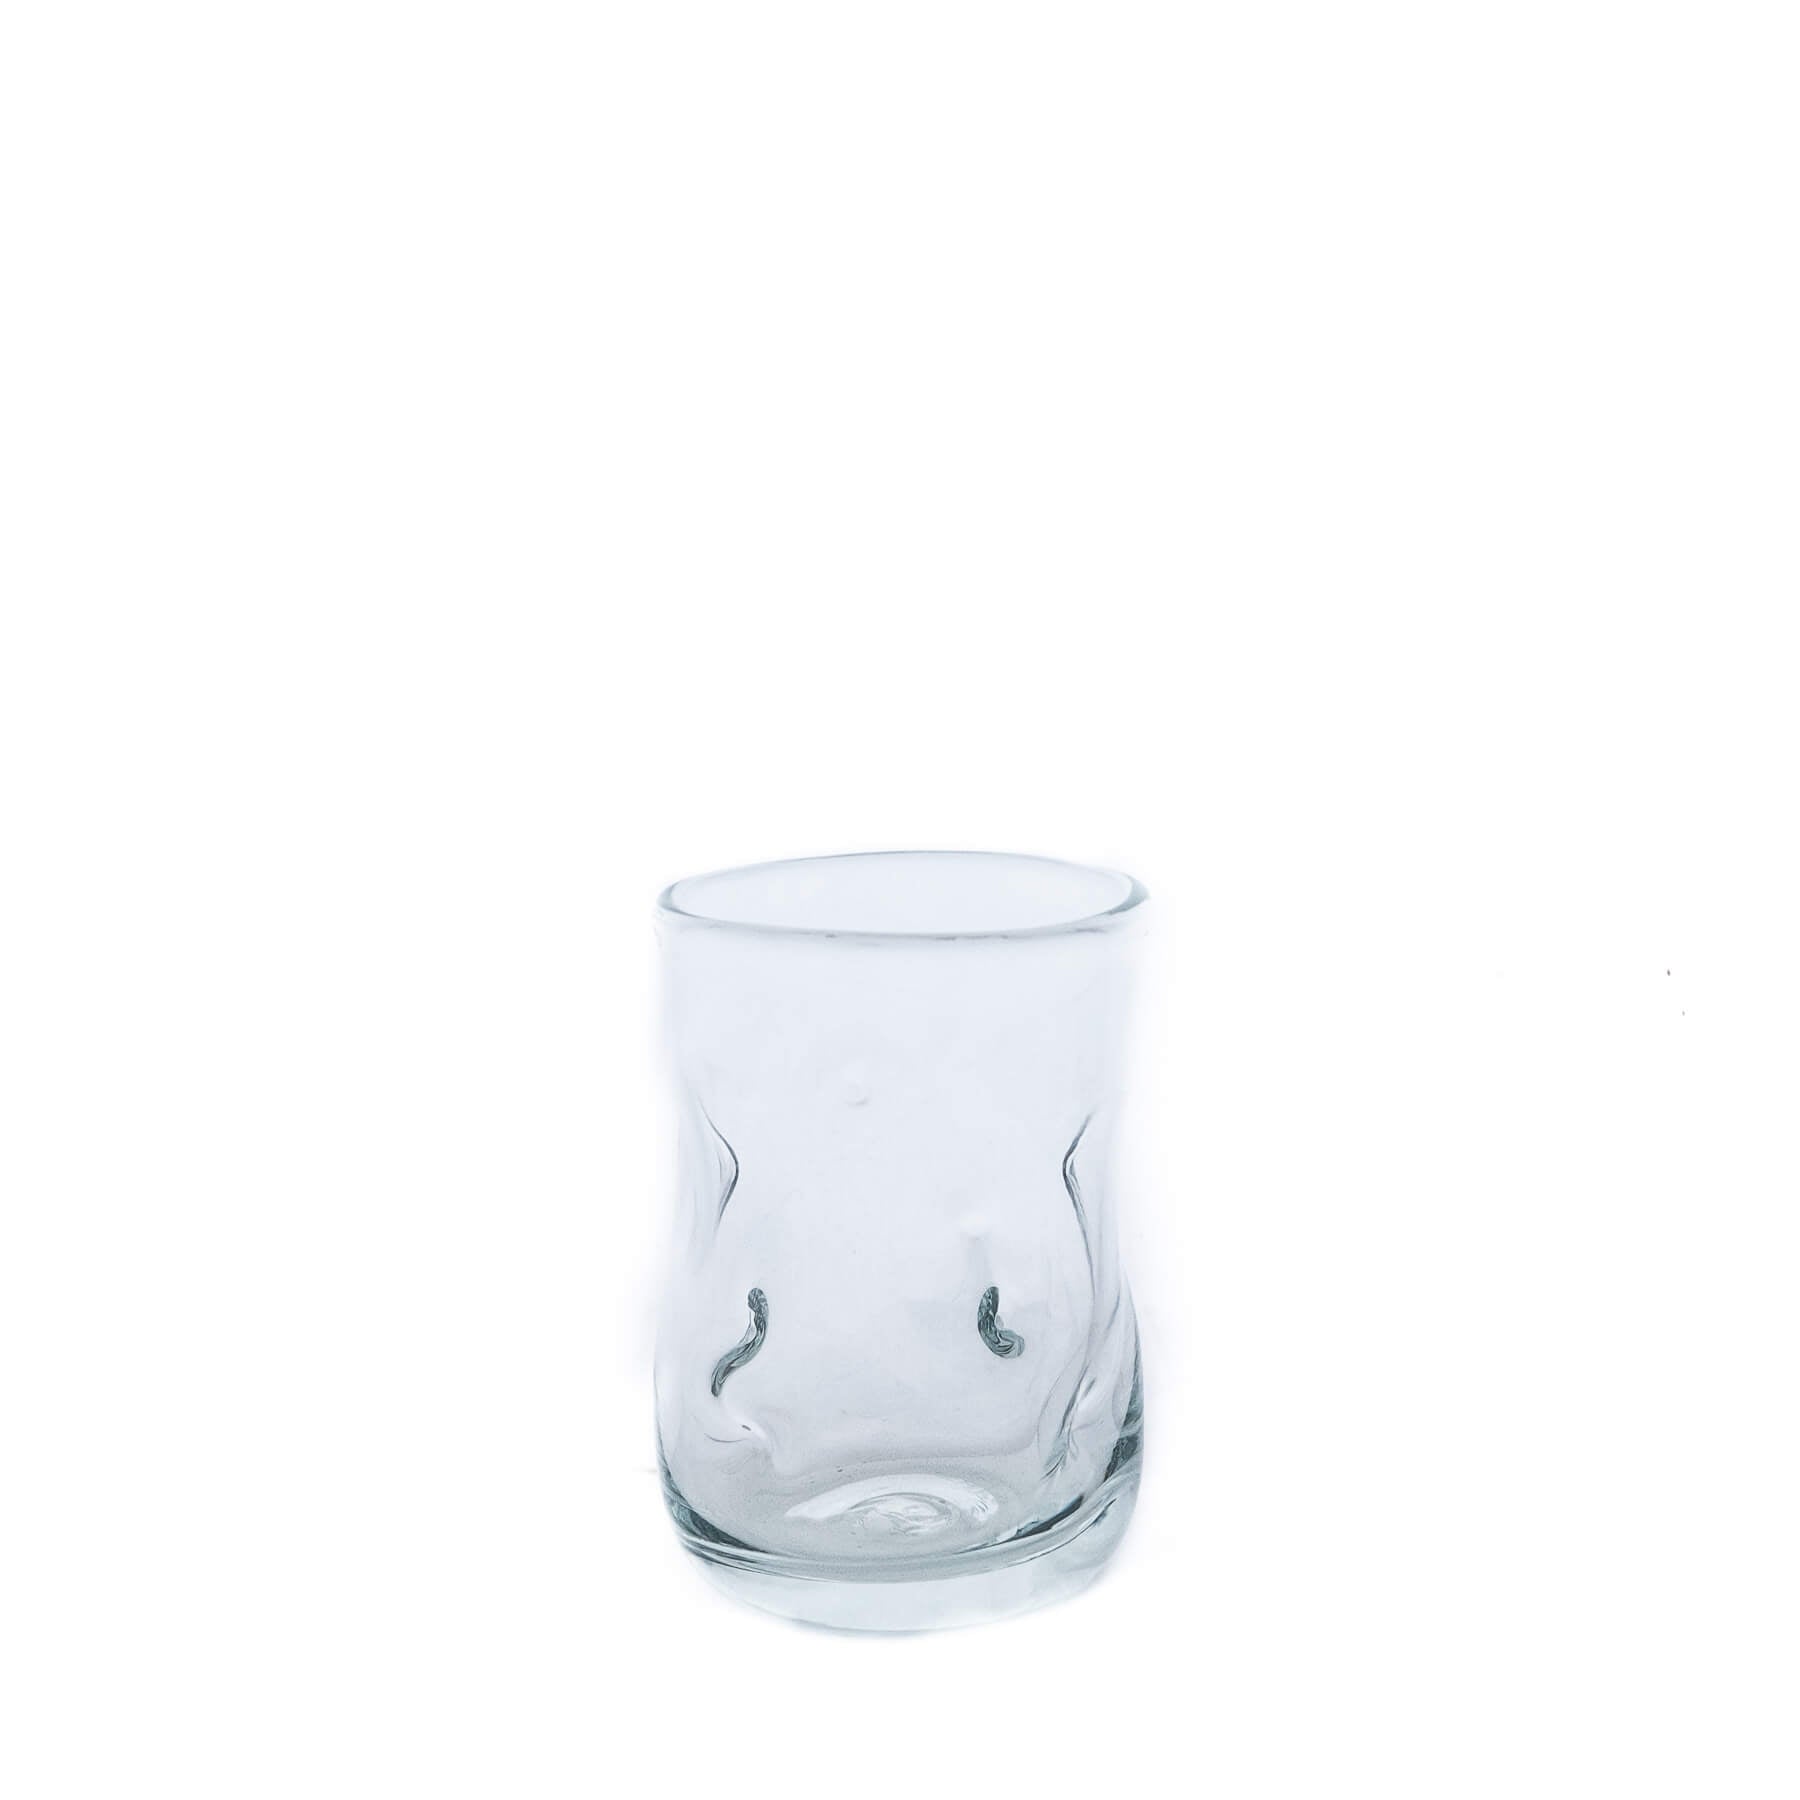 Product photo for Blenko 418S Small Dimple Glass - Crystal